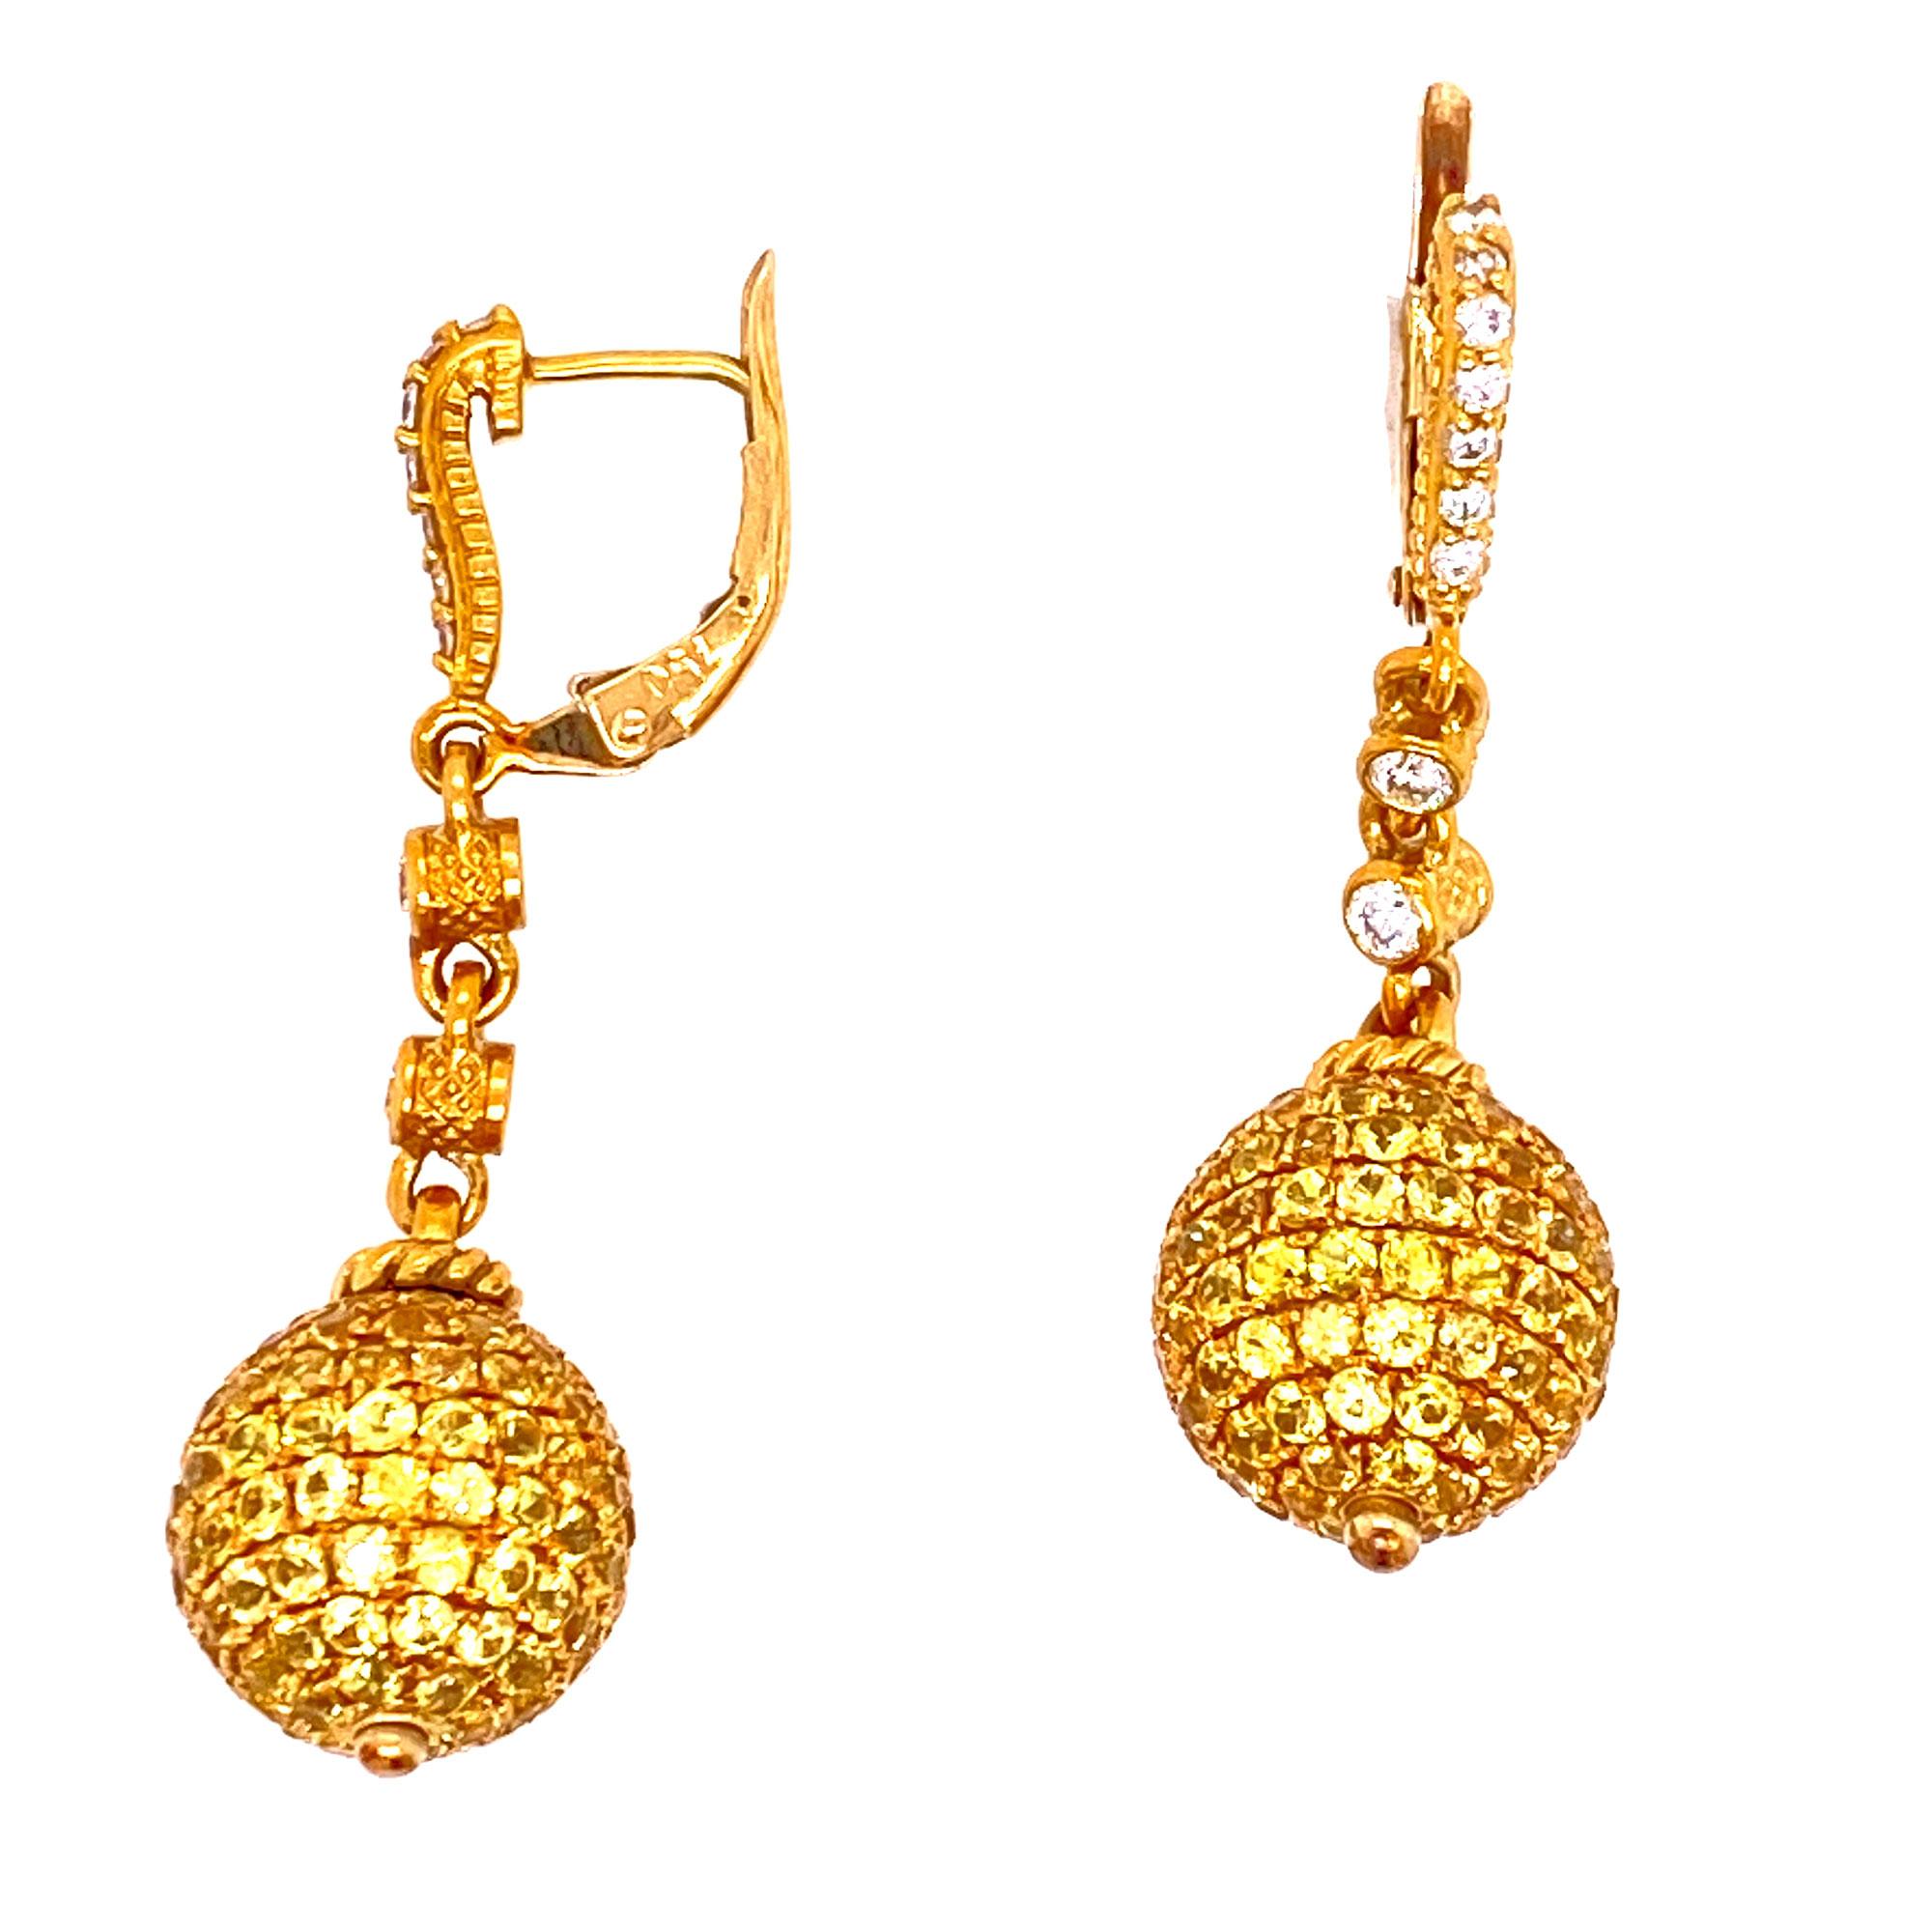 Yellow sapphire and diamond drop earrings by designer Judith Ripka. The earrings are fashioned in 18 karat yellow gold.  They feature .26 carats white round brilliant cut diamonds and large yellow sapphire encrusted ball drops. The earrings measure